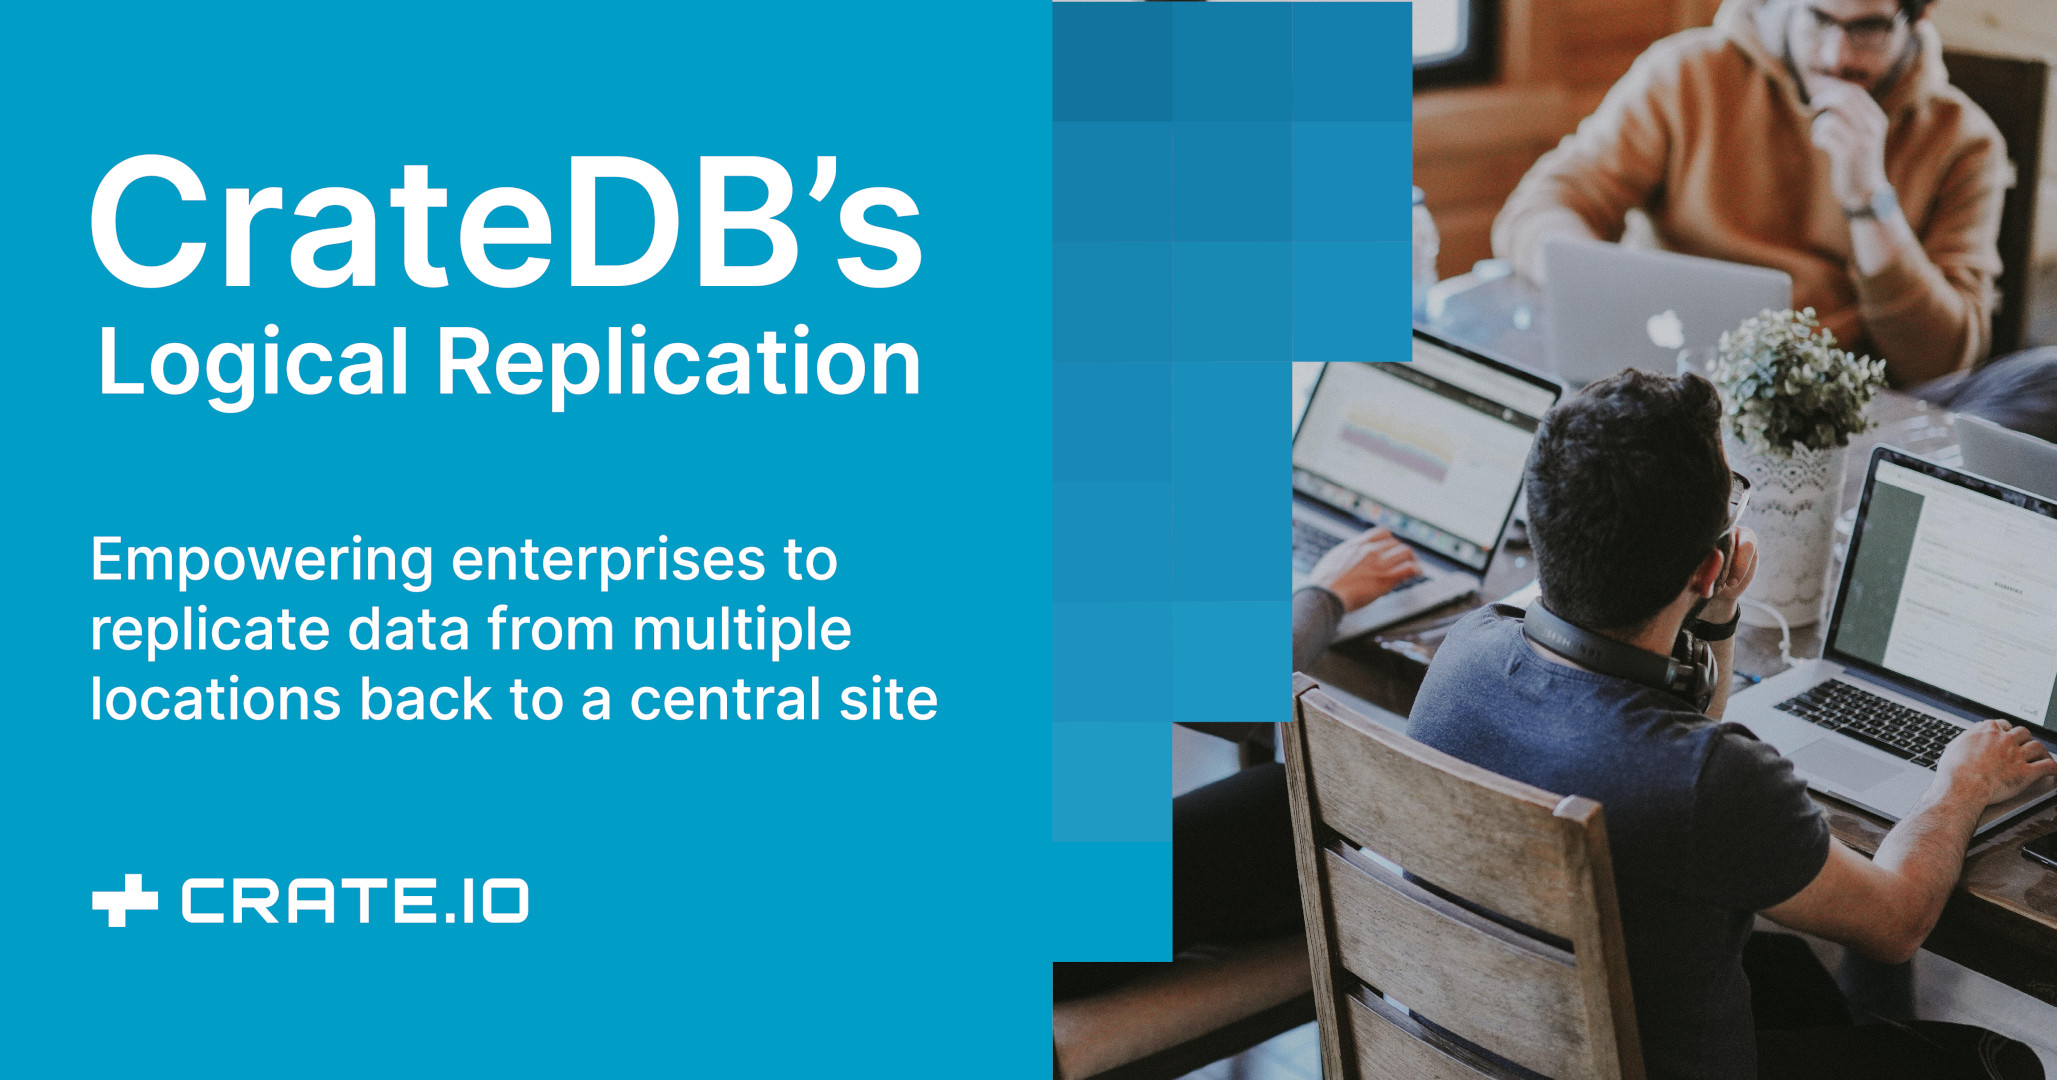 Empowering enterprises to replicate data from multiple locations back to a central site